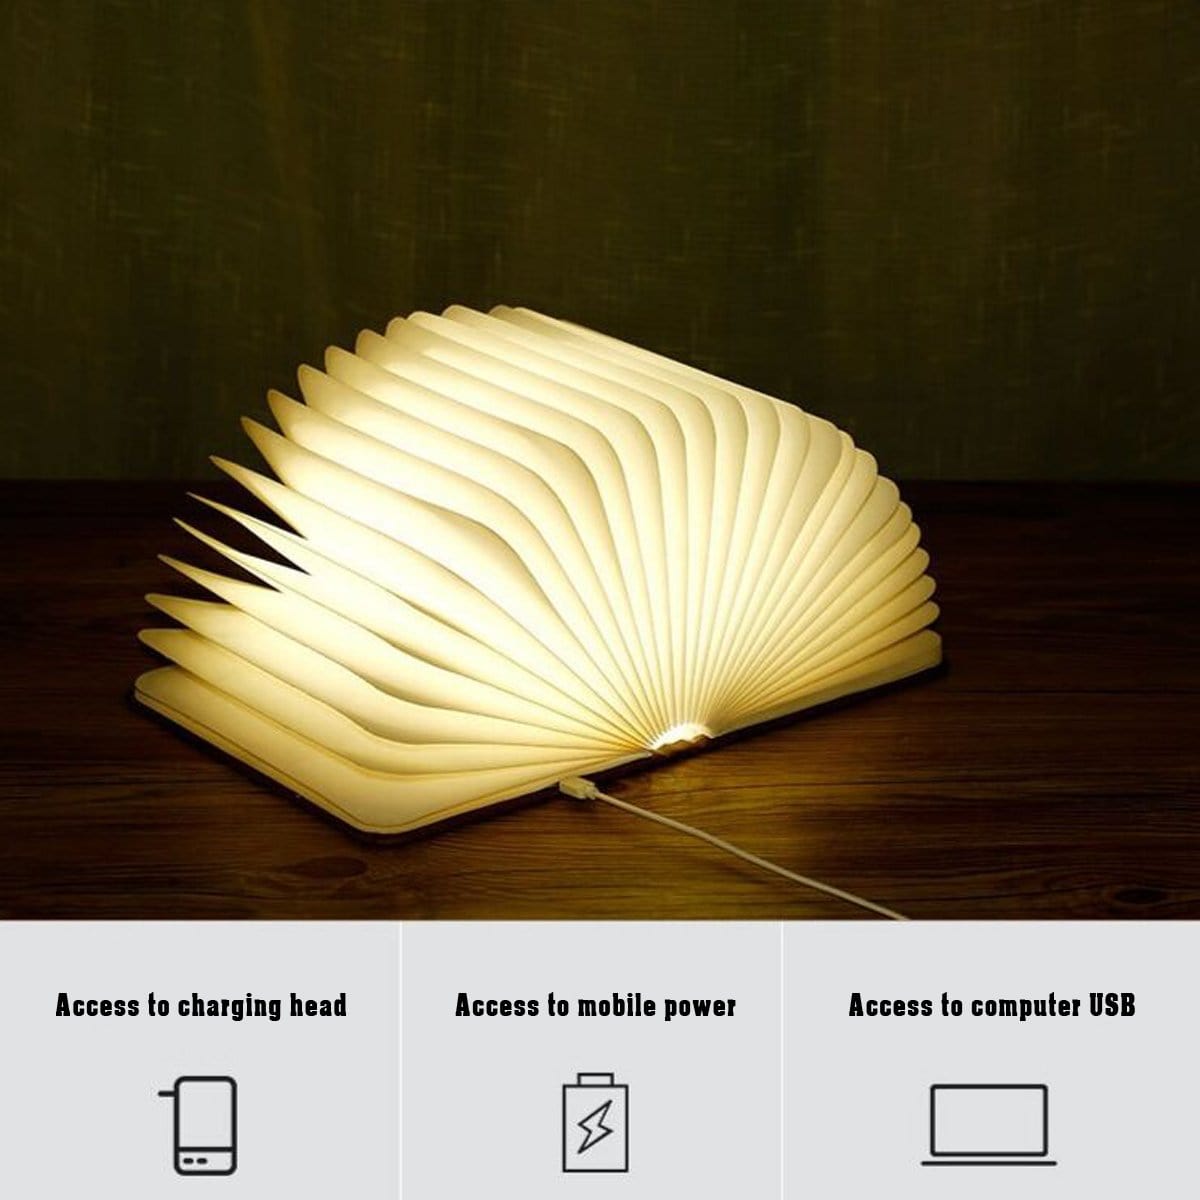 Book Lamp Mom To Daughter - Never Forget That I Love You LED Folding Book Light GiveMe-Gifts